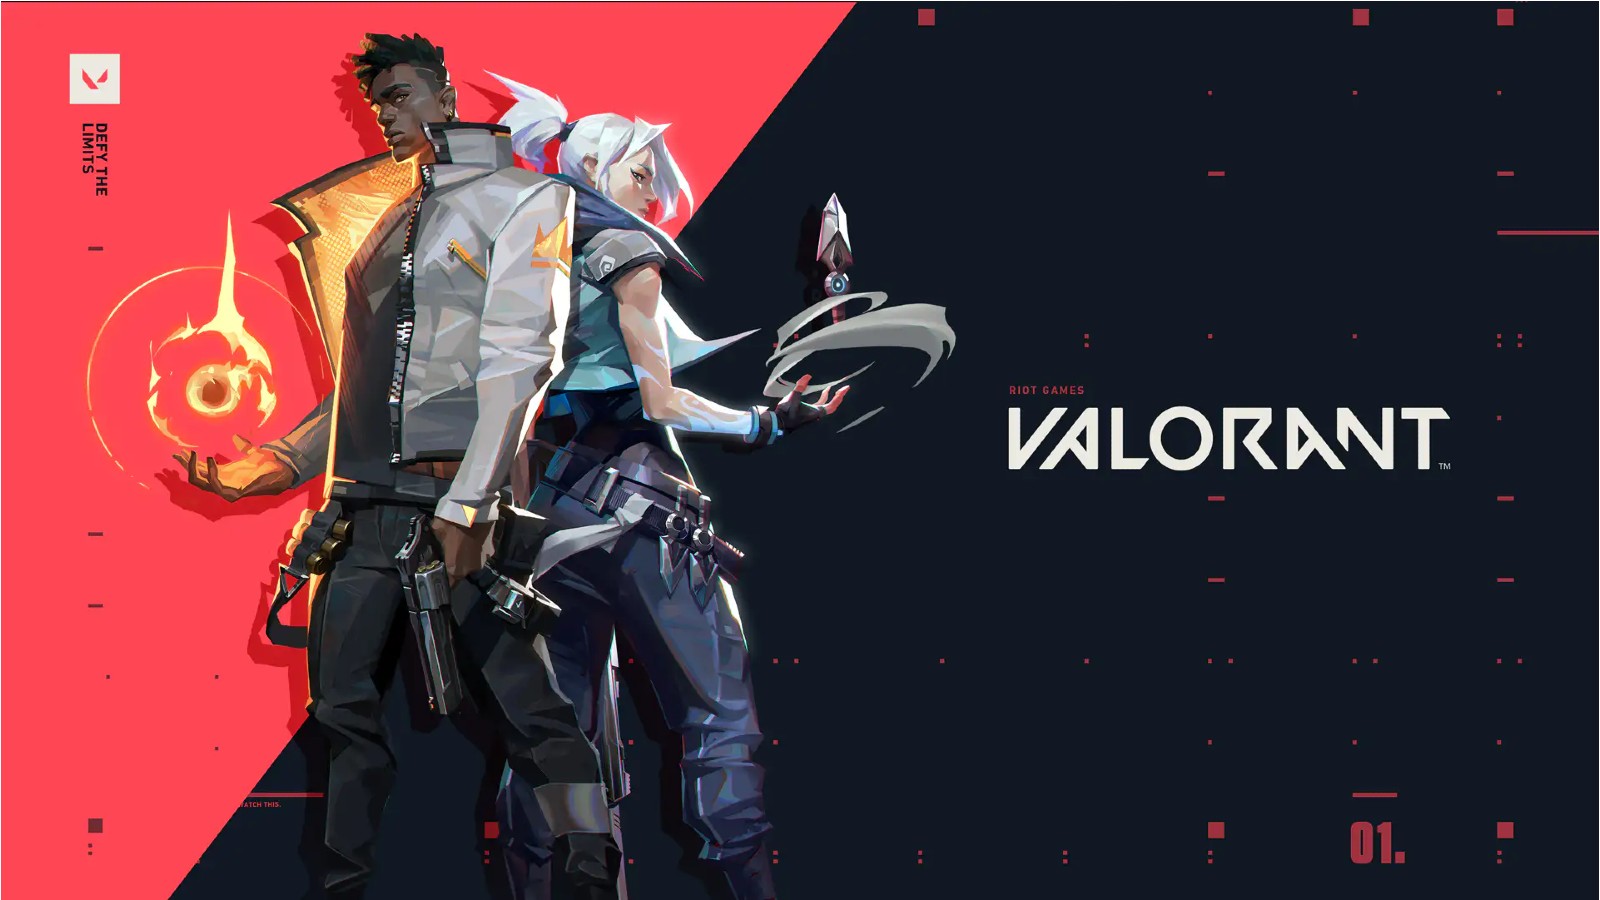 VALORANT First Strike Wallpapers